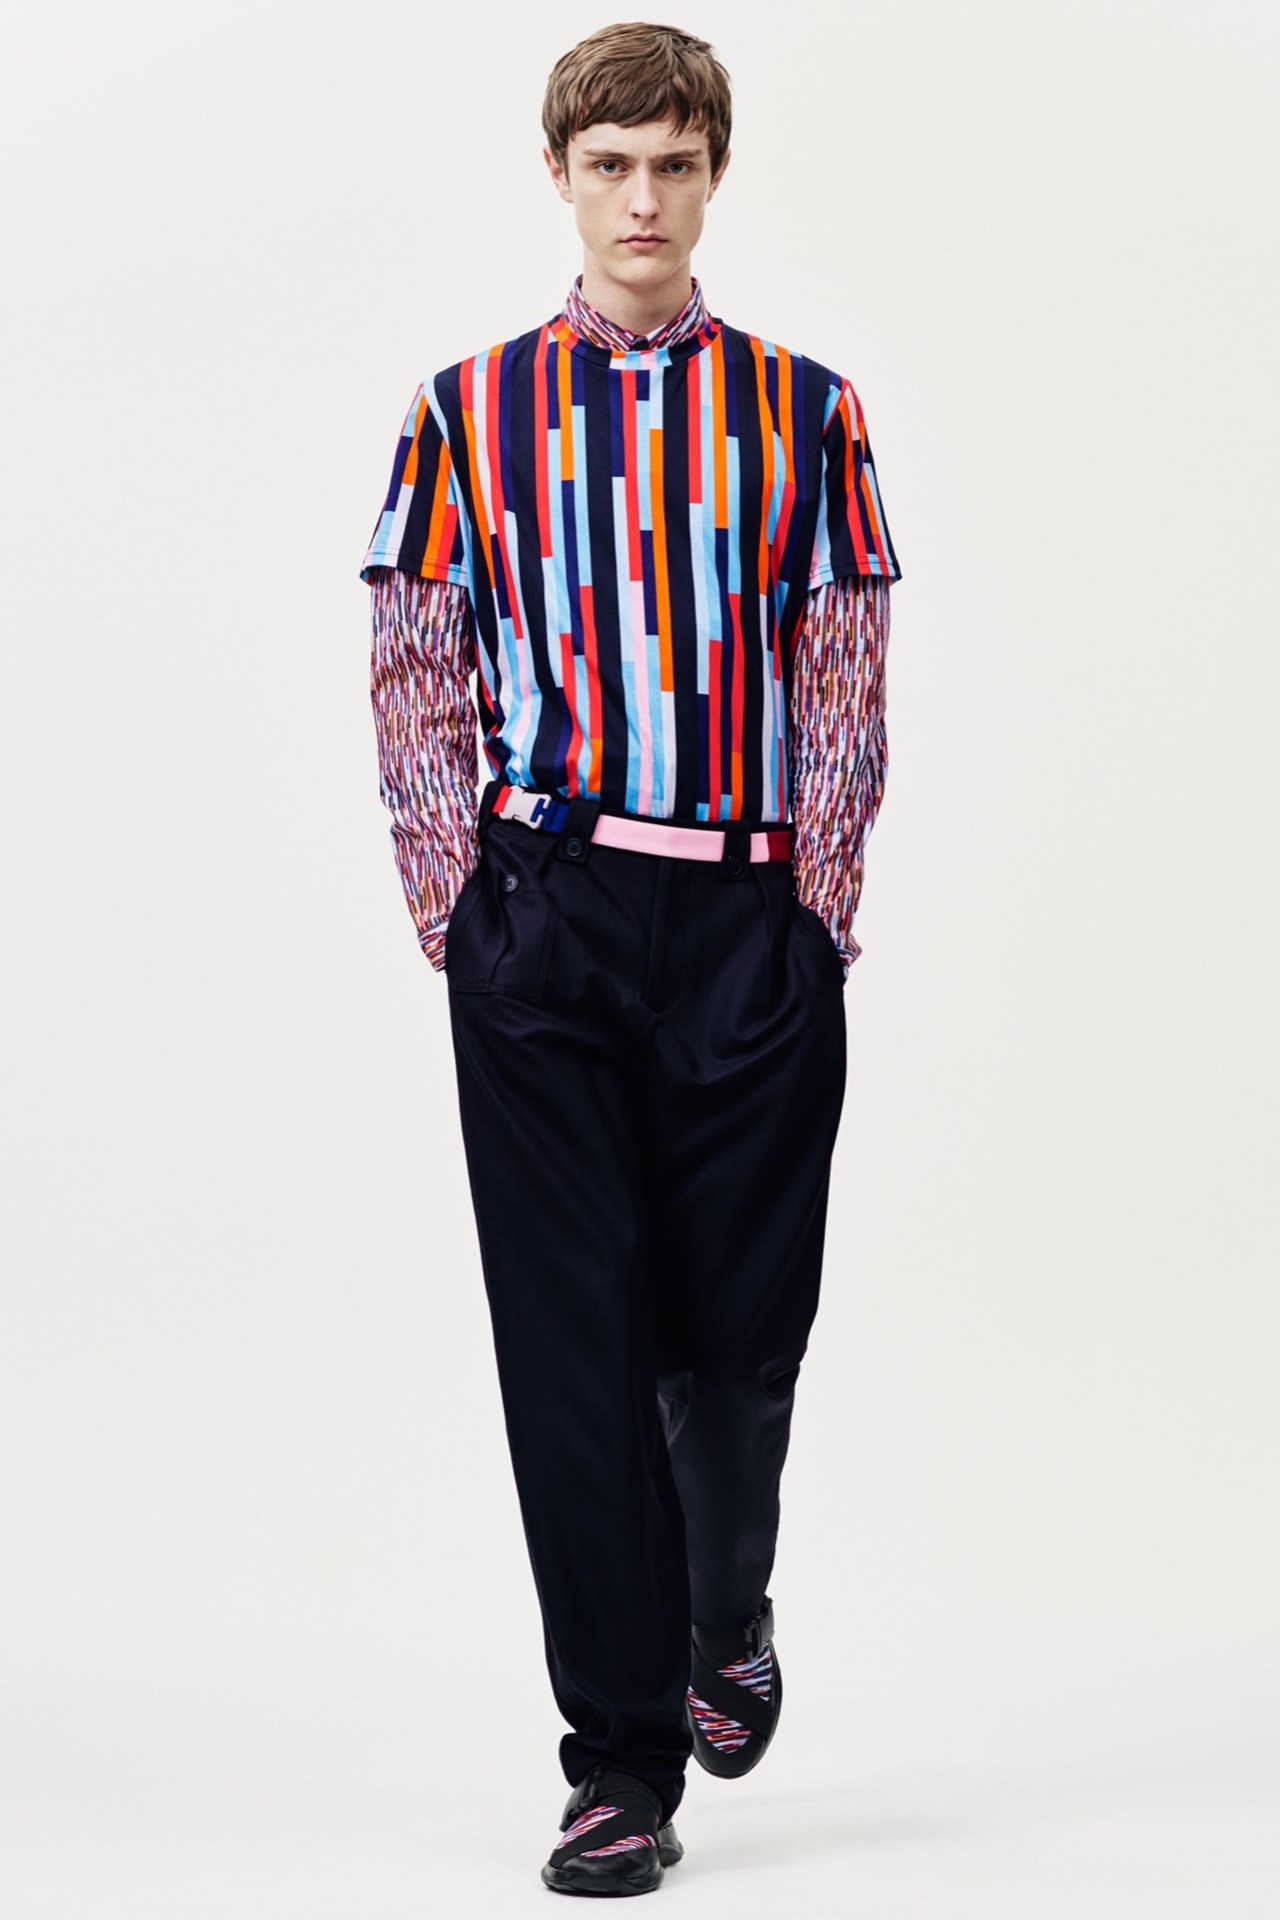 Christopher Kane Spring/Summer 2016 | London Collections: Men | The ...